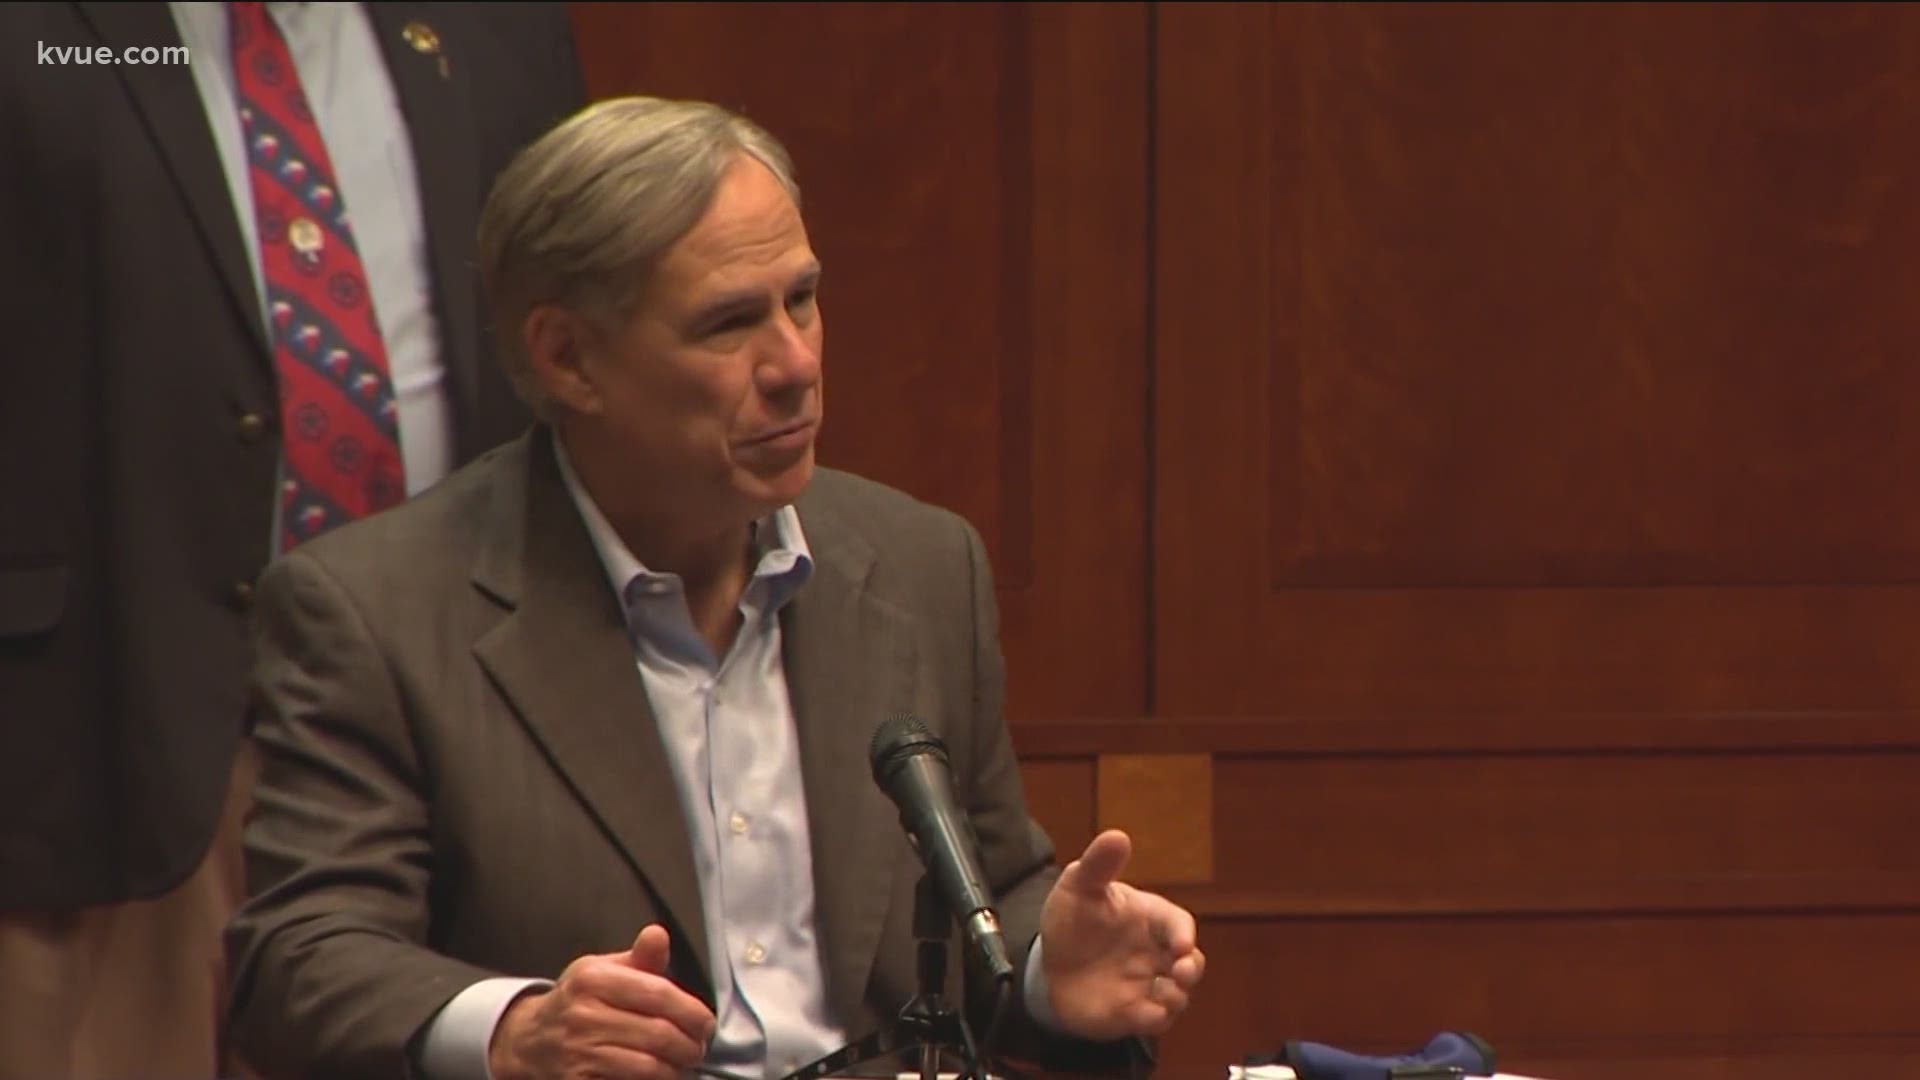 Gov. Abbott said Texas will not have to go into another shutdown again if everyone does their part.